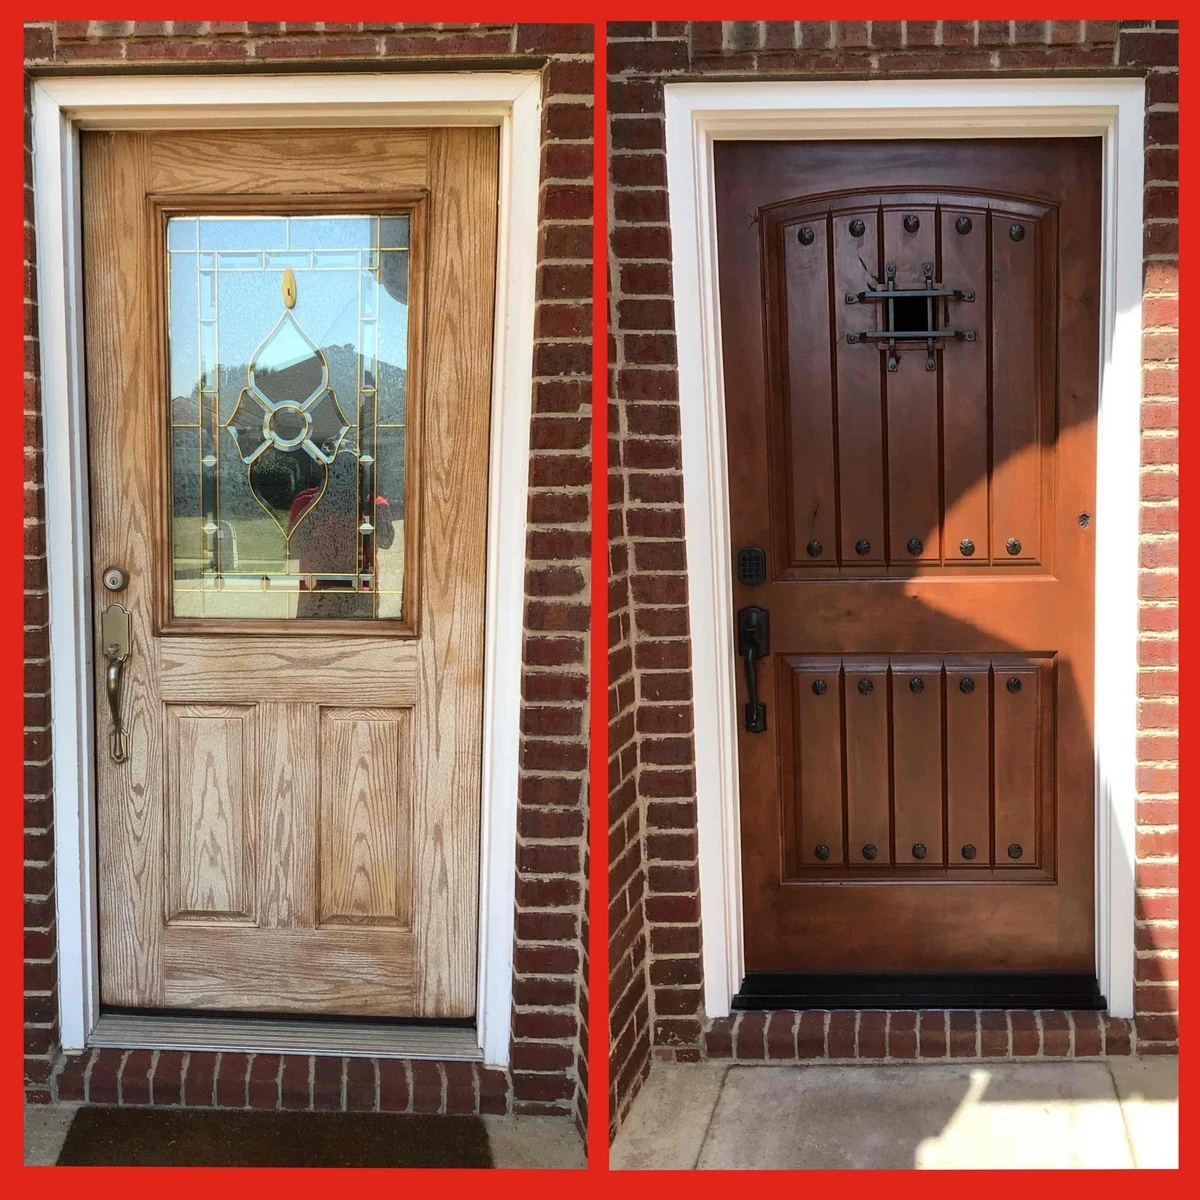 The front door of a home before and after it has been replaced with the help of Mr. Handyman’s services for door replacement in Primrose, TX.